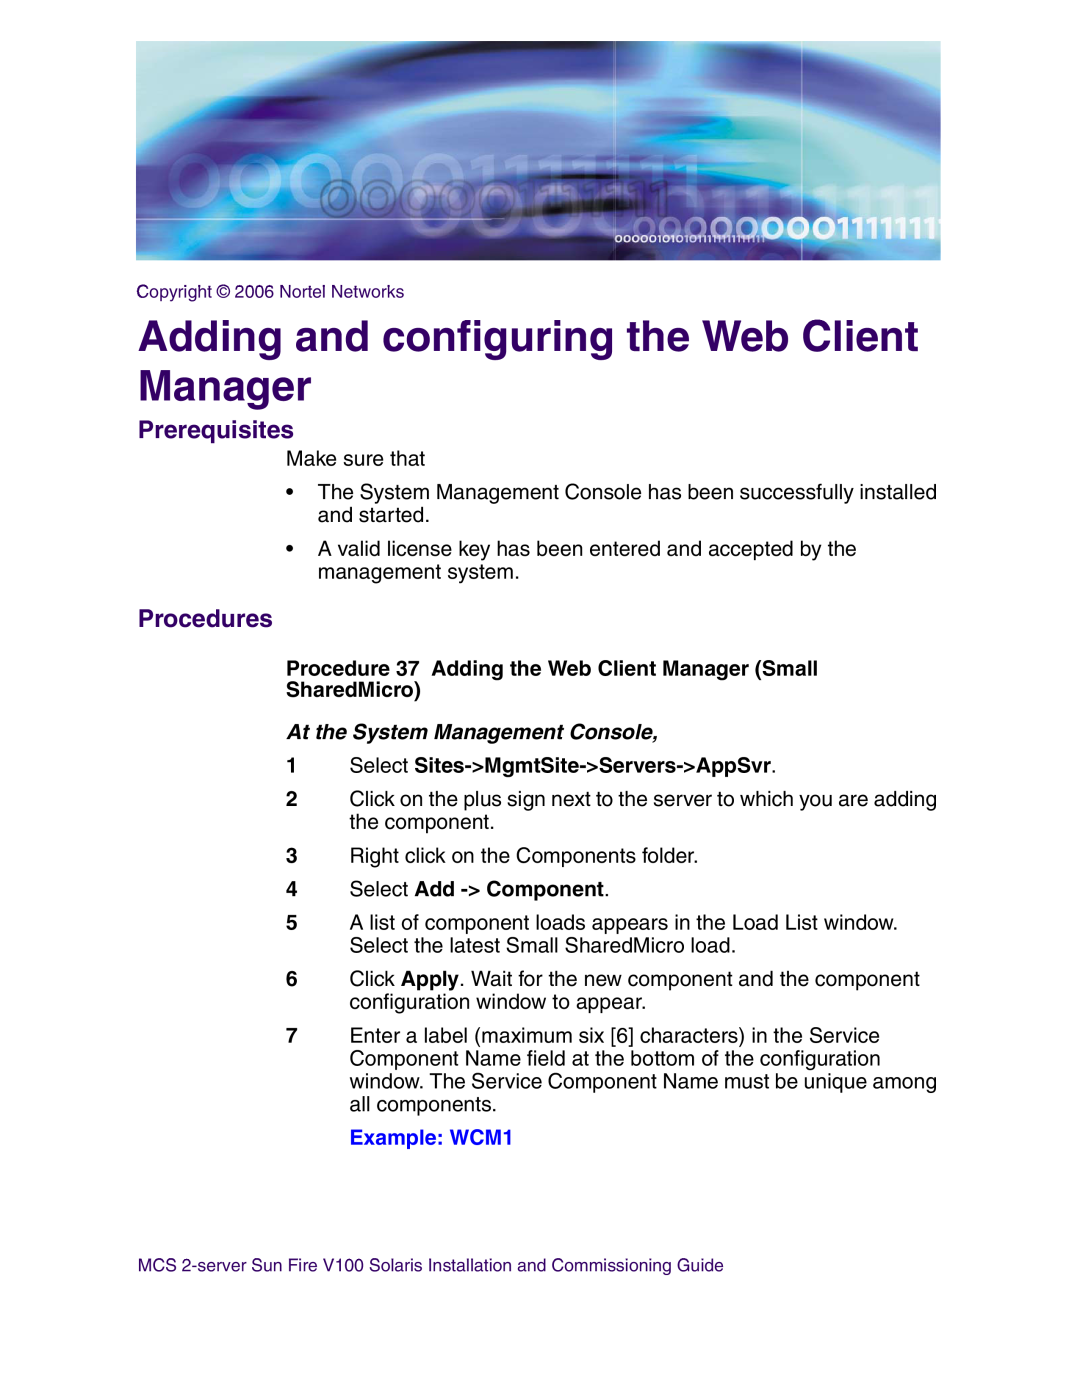 Nortel Networks V100 manual Adding and configuring the Web Client Manager, Example WCM1, Prerequisites, Procedures 